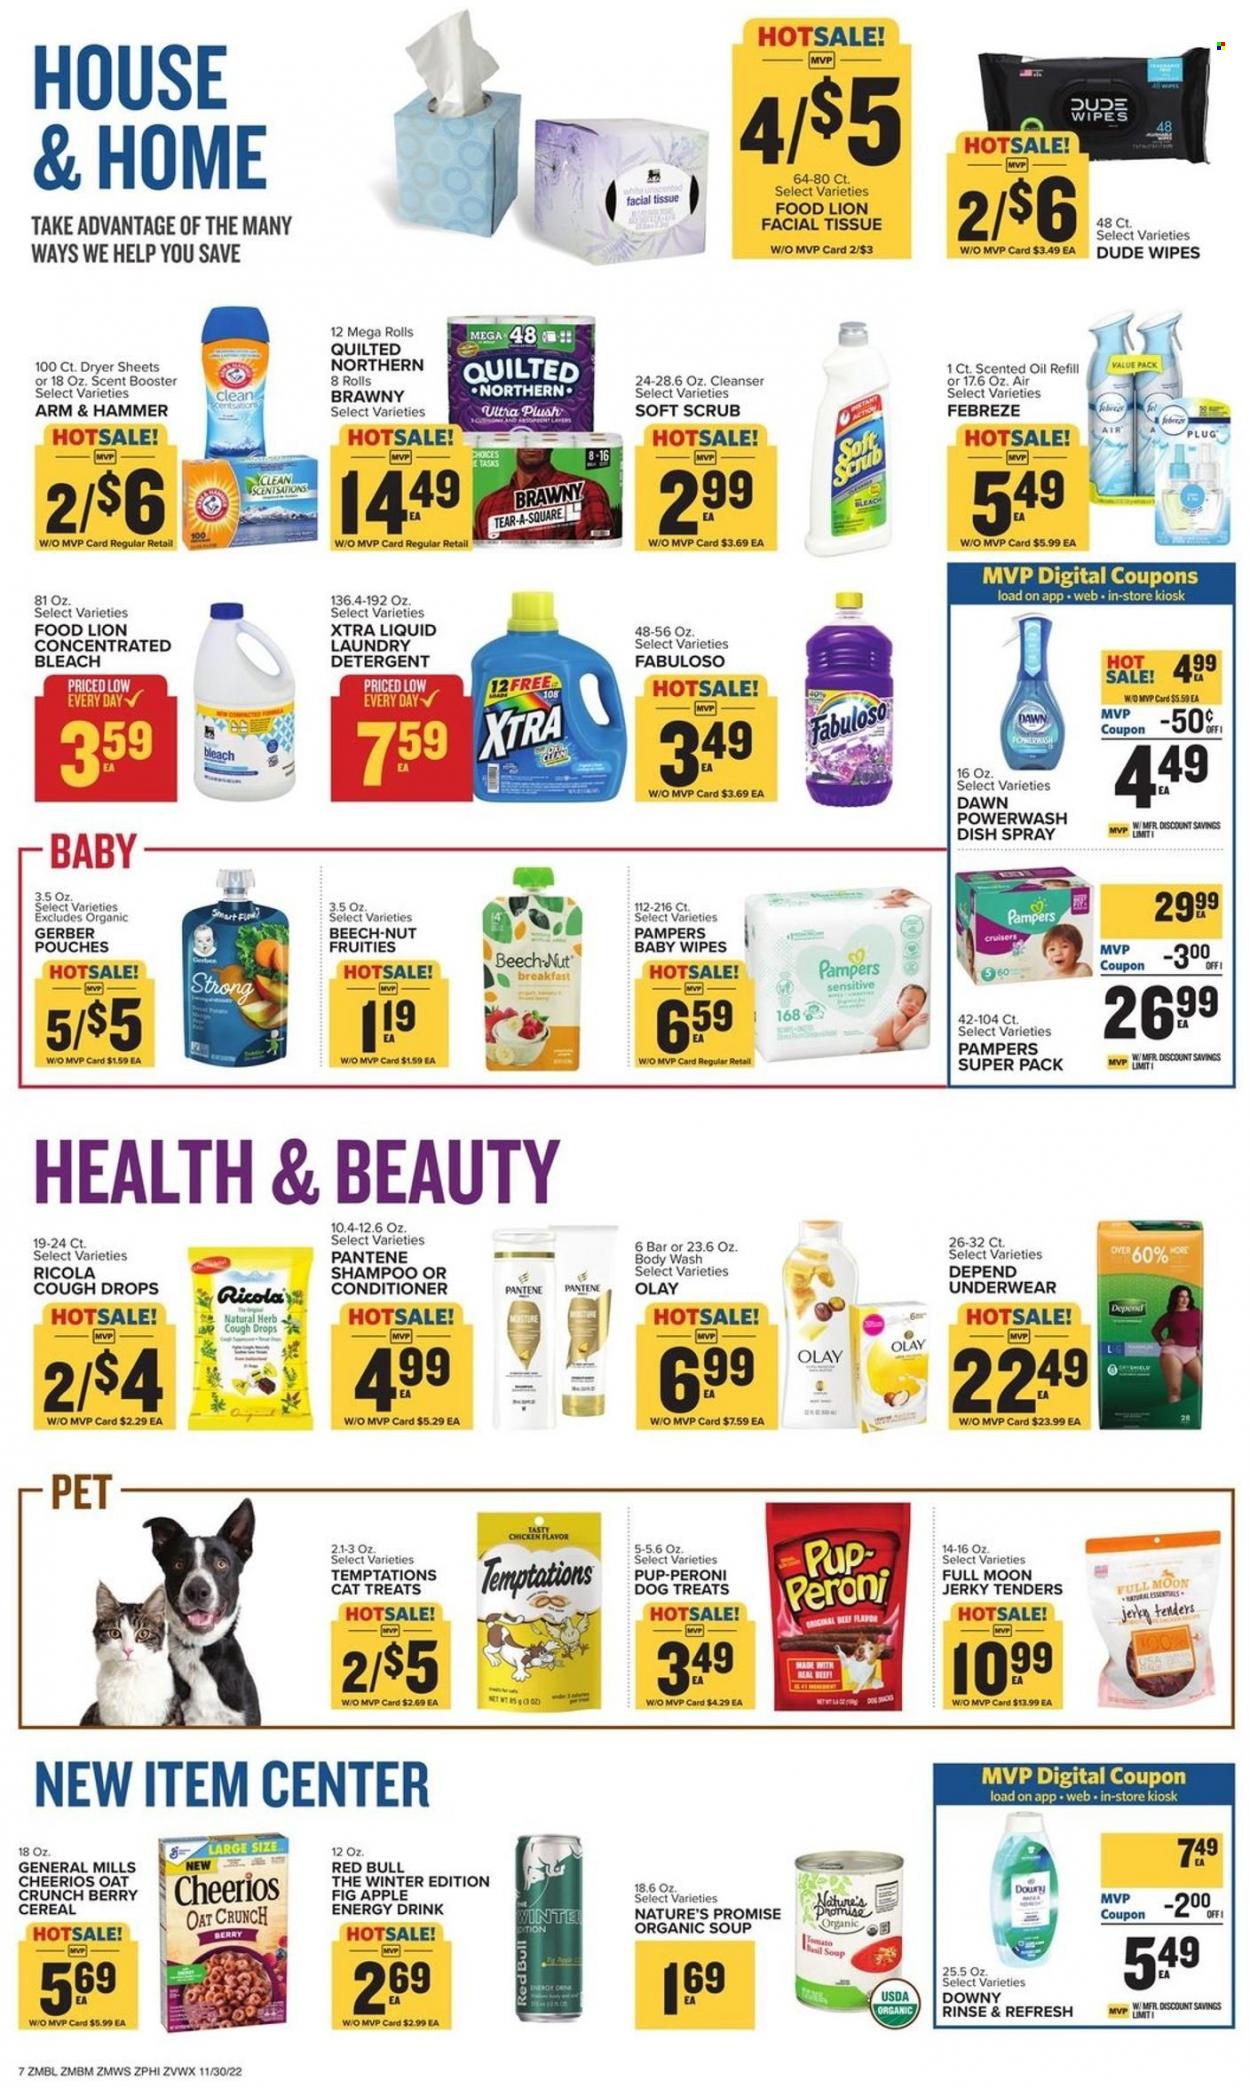 thumbnail - Food Lion Flyer - 11/30/2022 - 12/06/2022 - Sales products - Nature’s Promise, soup, jerky, ricola, Gerber, oats, cereals, Cheerios, herbs, oil, energy drink, Red Bull, baby food pouch, wipes, Pampers, baby wipes, Quilted Northern, tissues, detergent, Febreze, bleach, Fabuloso, laundry detergent, dryer sheets, XTRA, body wash, shampoo, cleanser, Olay, conditioner, Pantene, scented oil, Pup-Peroni, cough drops. Page 7.